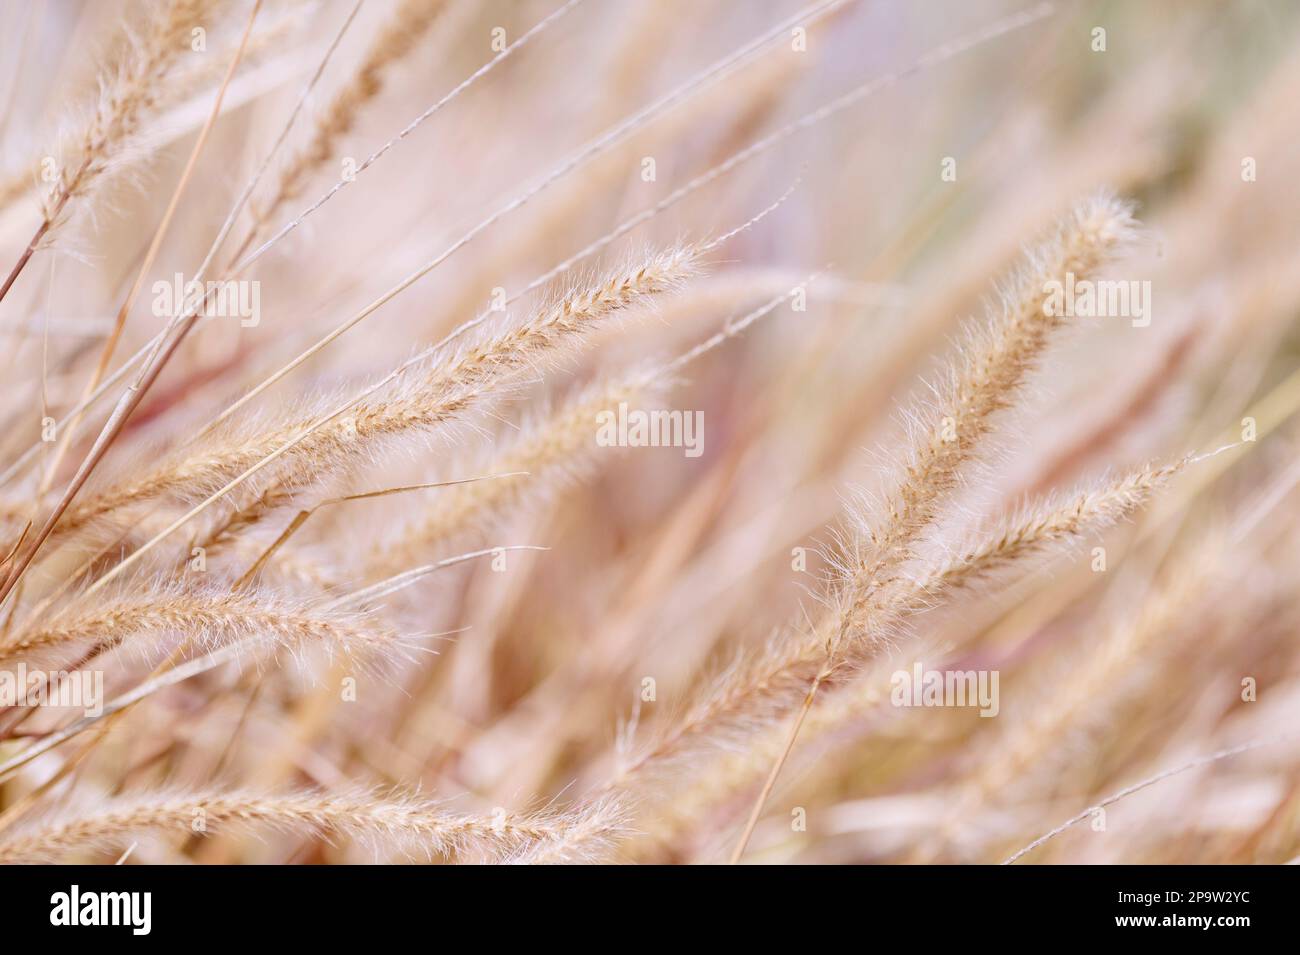 Photo background of dry foxtail Setaria Viridis ears and leaves Stock Photo